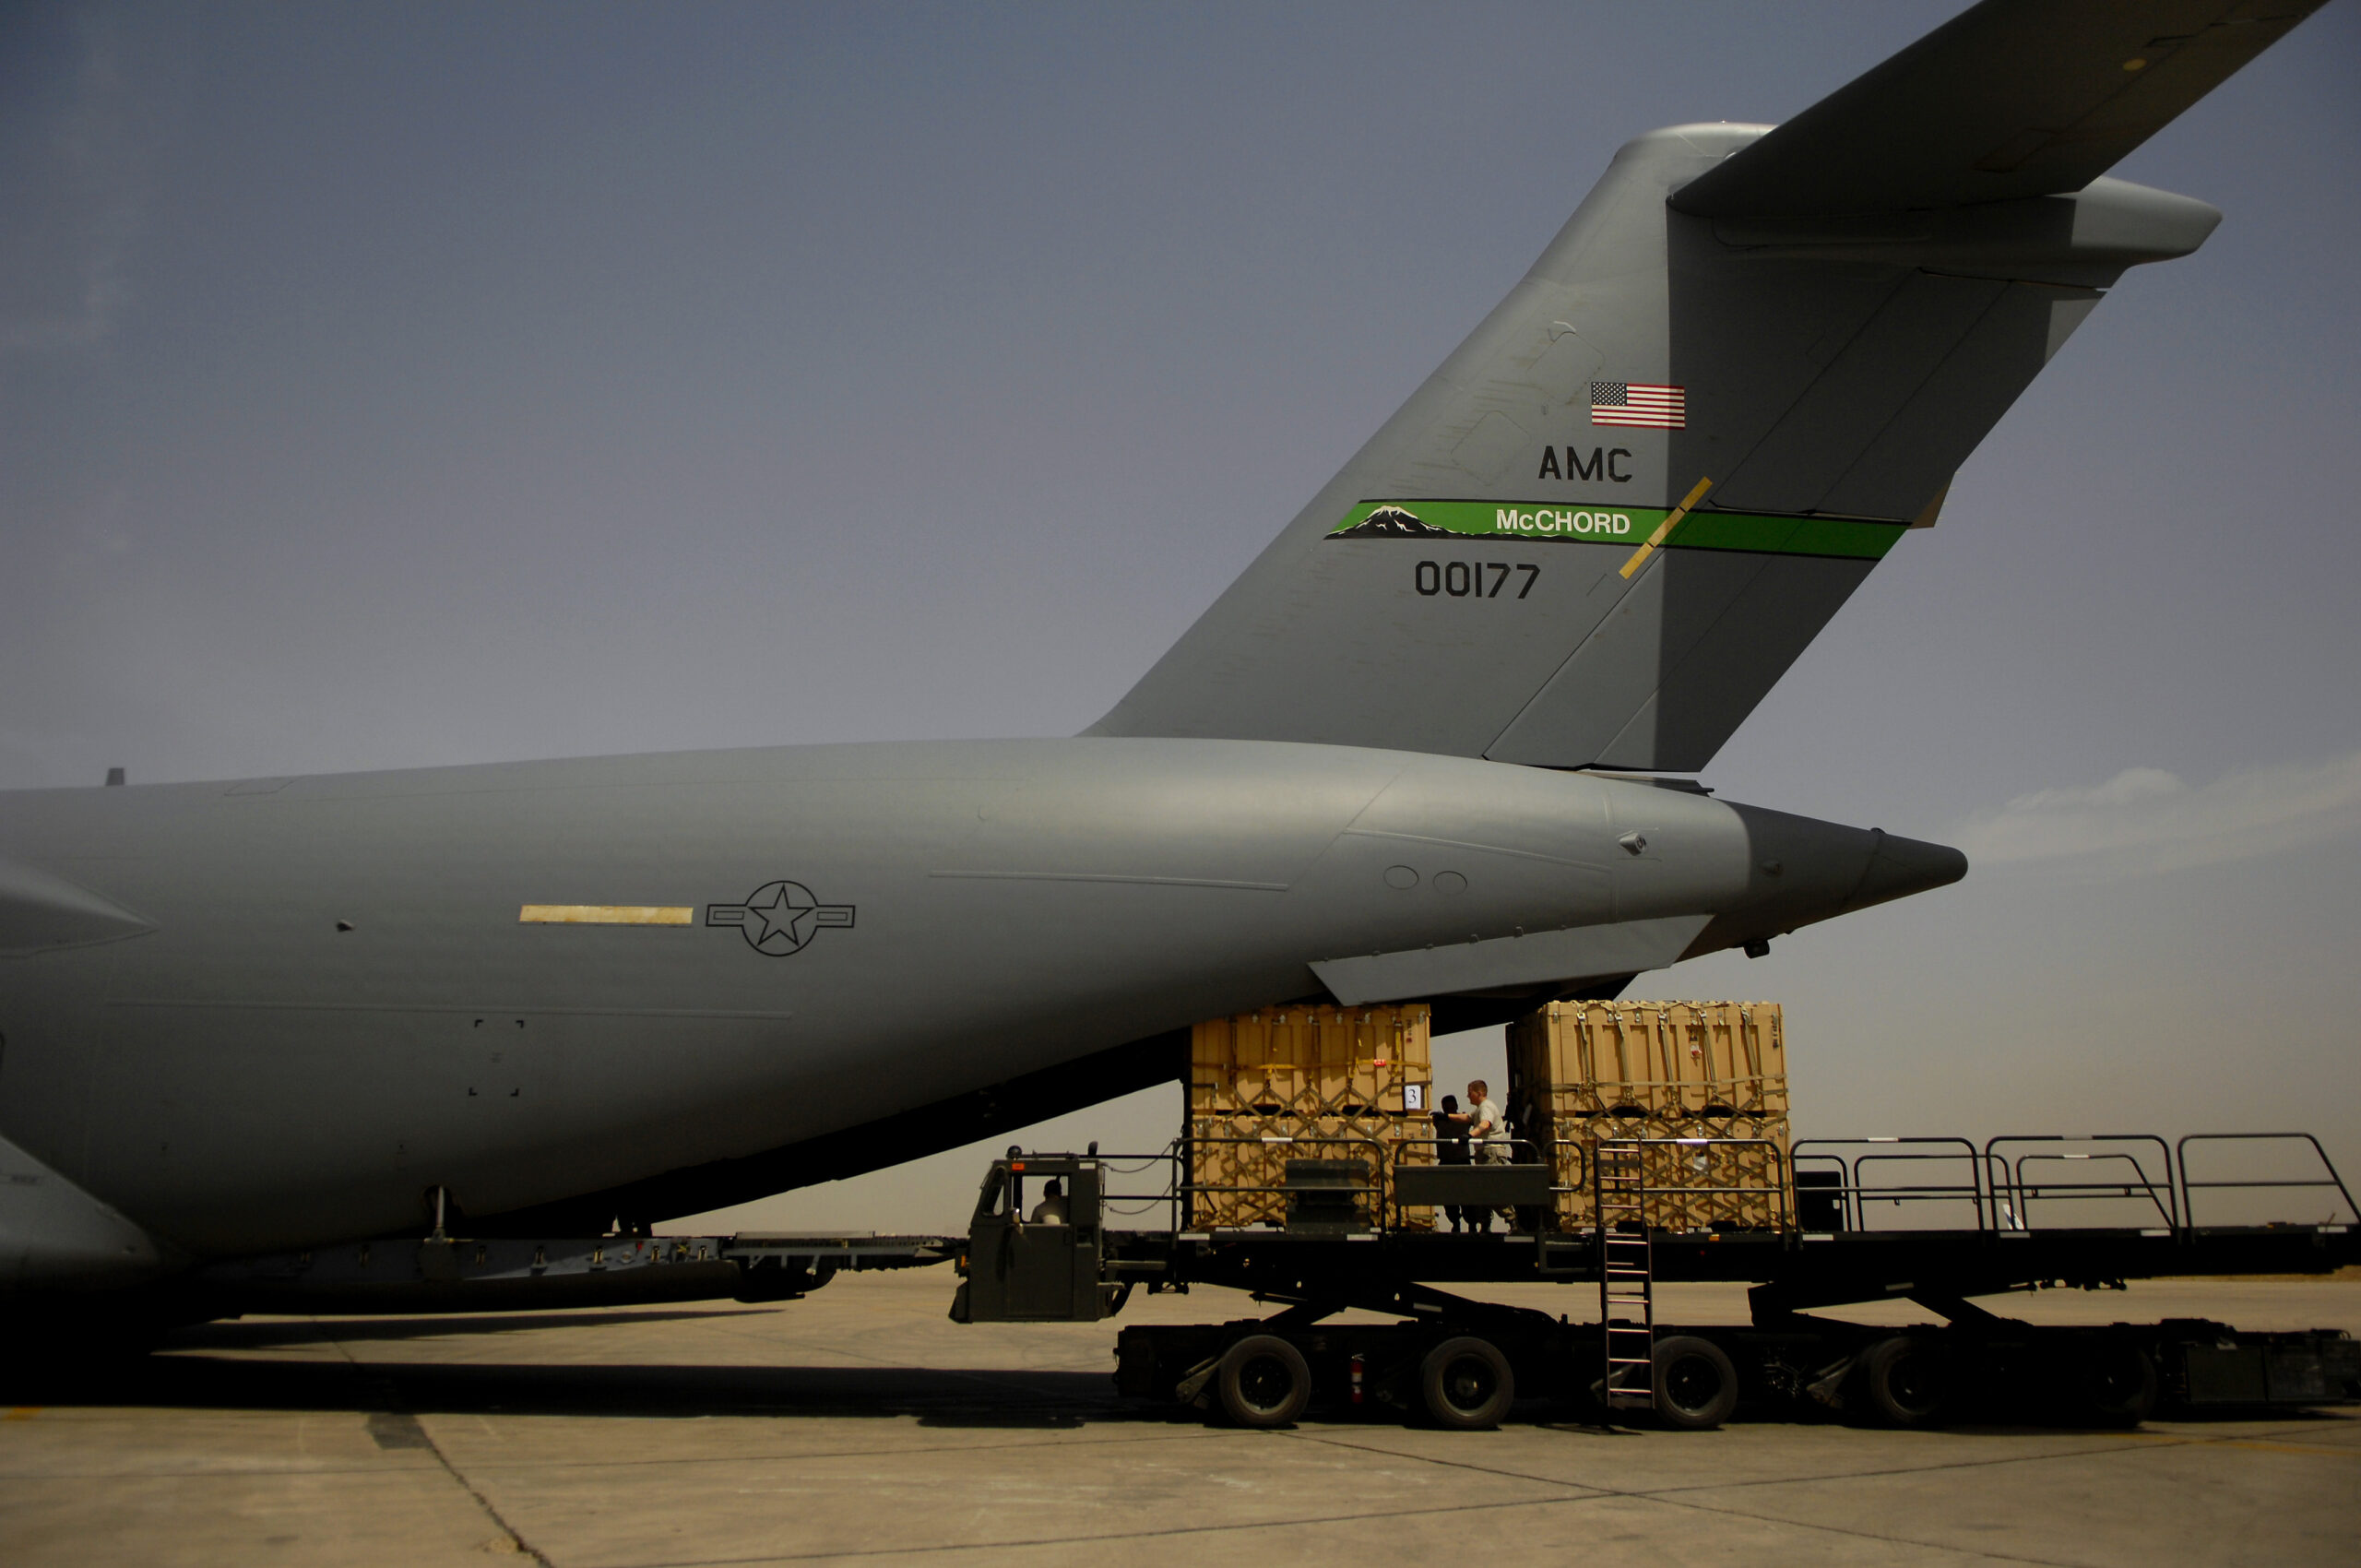 Pallets are loaded on a C-17 Globemaster III at Sather Air Base, Iraq on April 15, 2008. Temperatures in Baghdad reached over 100 degrees for the second day in a row. (U.S. Air Force photo/Tech. Sgt. Jeffrey Allen)